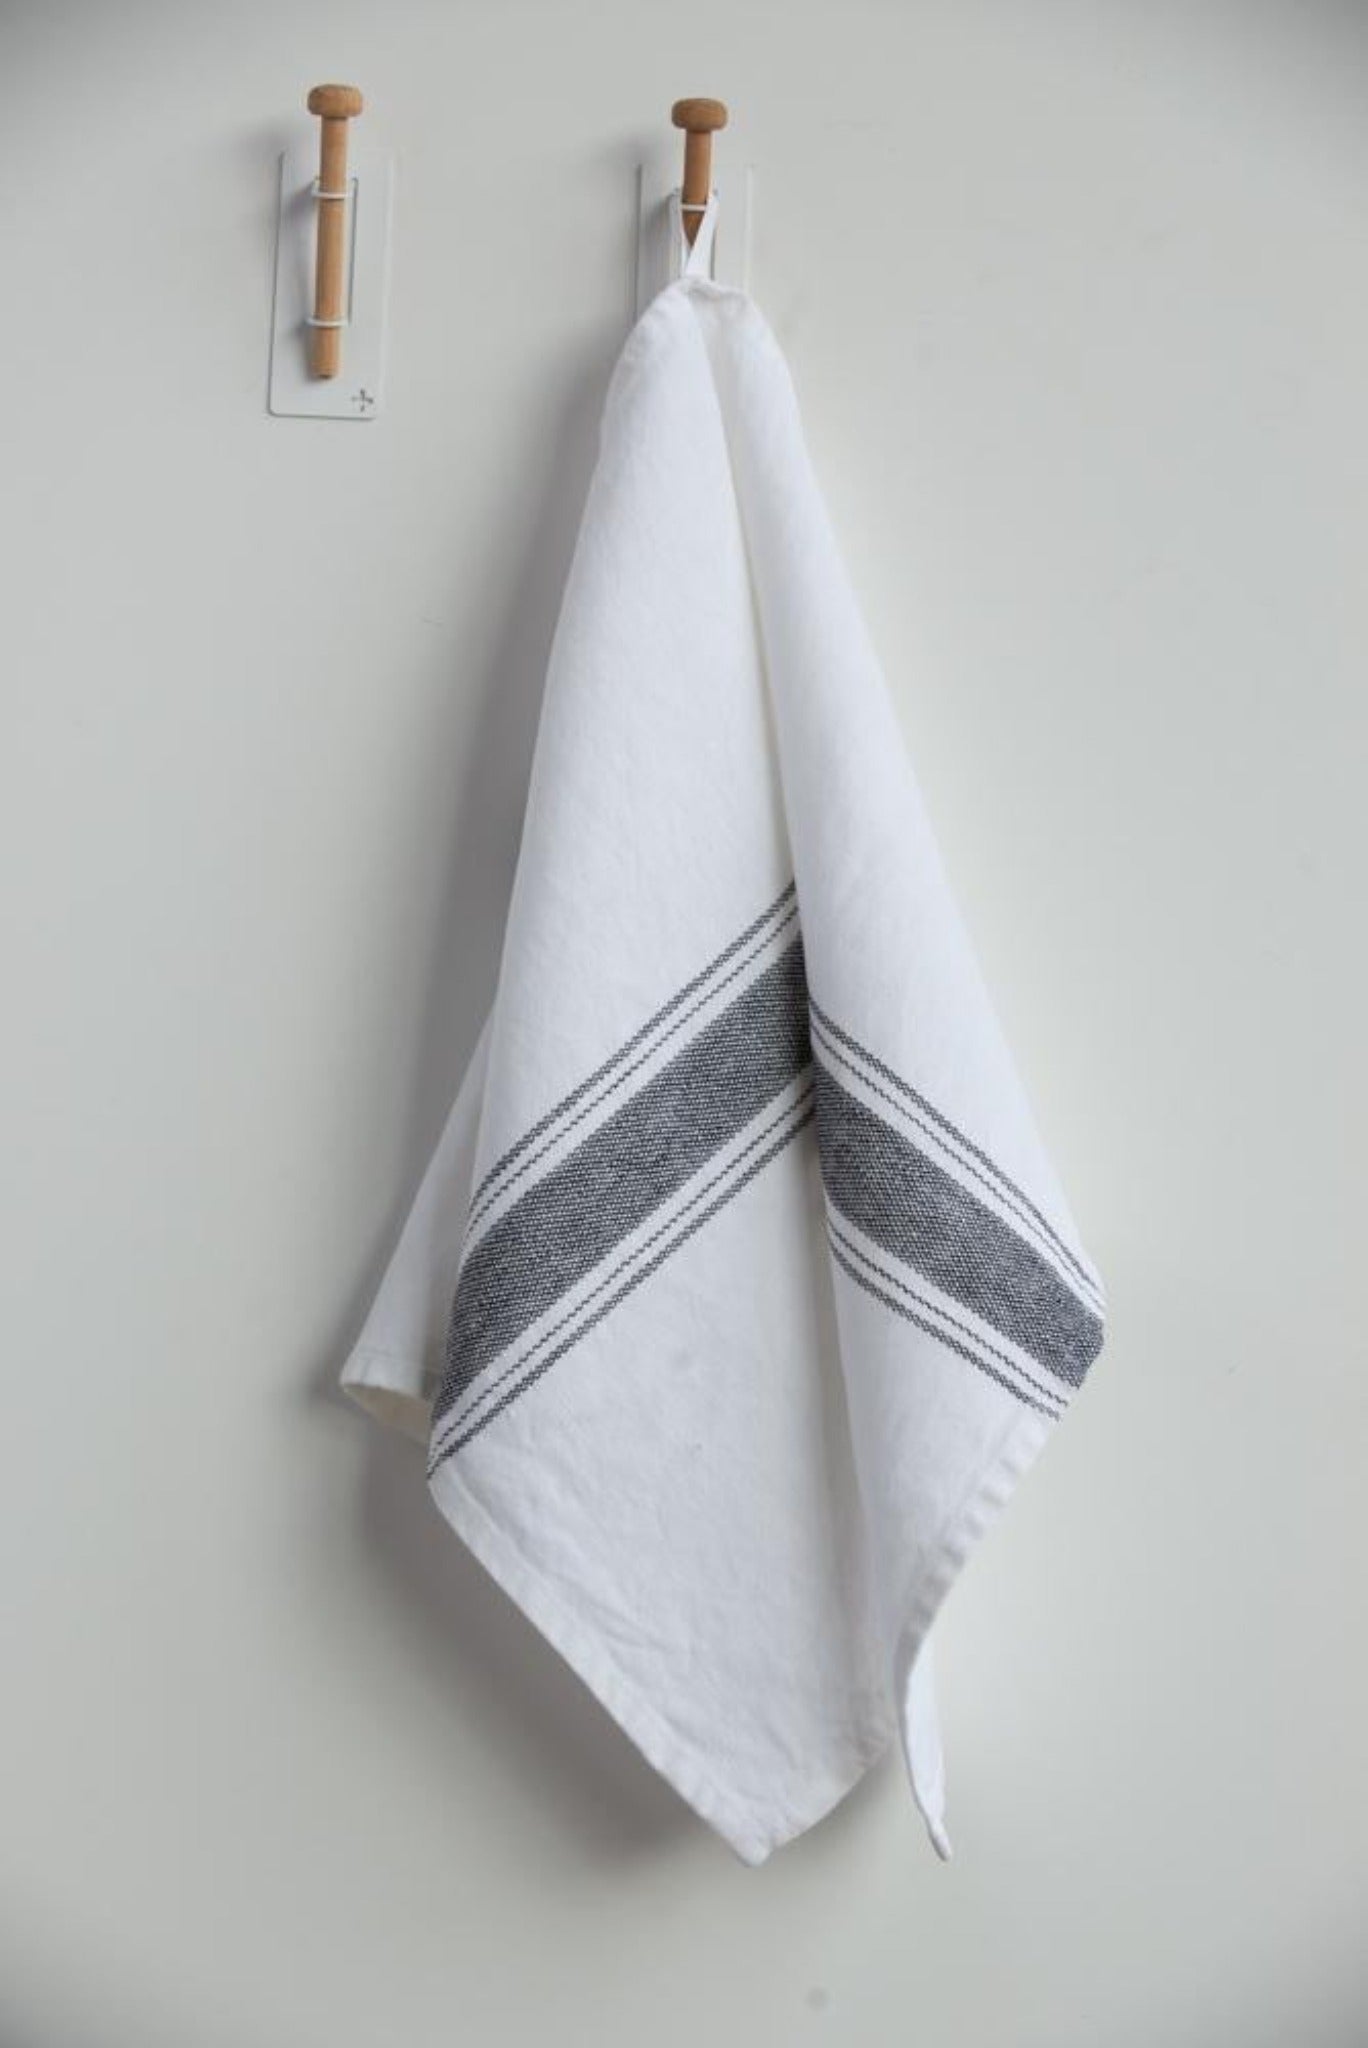 Farmhouse Linen Tea / Guest Towel: 17" x 28", handmade in Canada with the finest quality linen. Natural fibers.